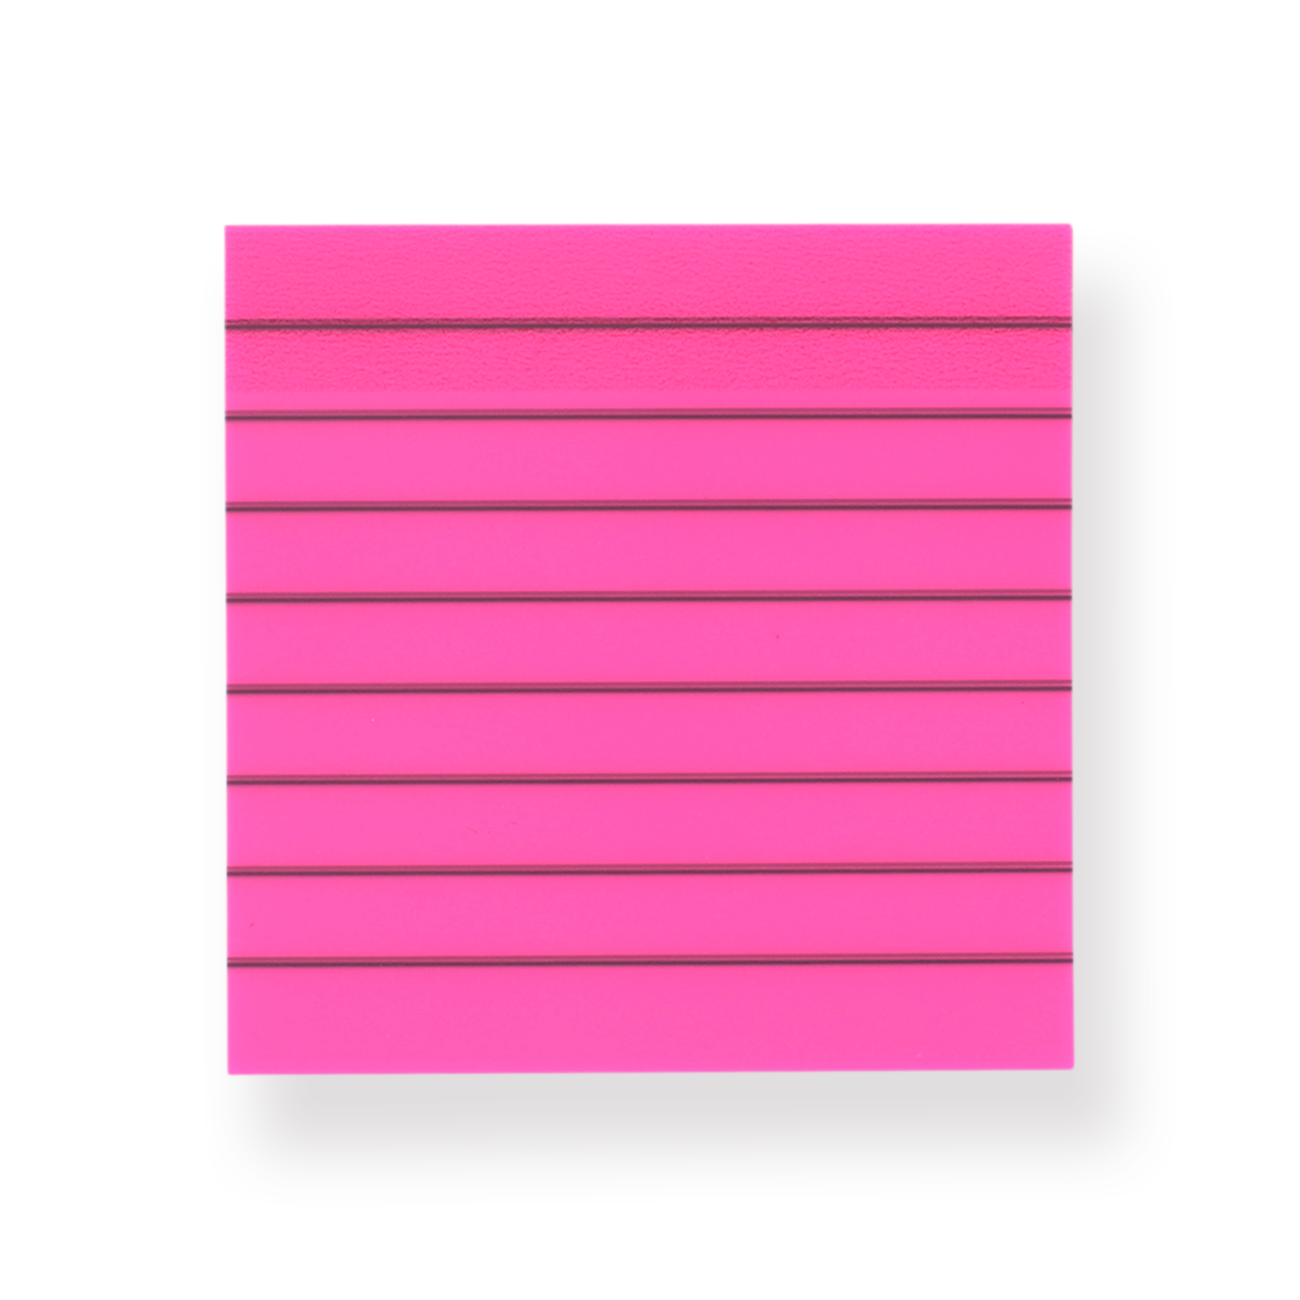 Post-its - One Color Neon